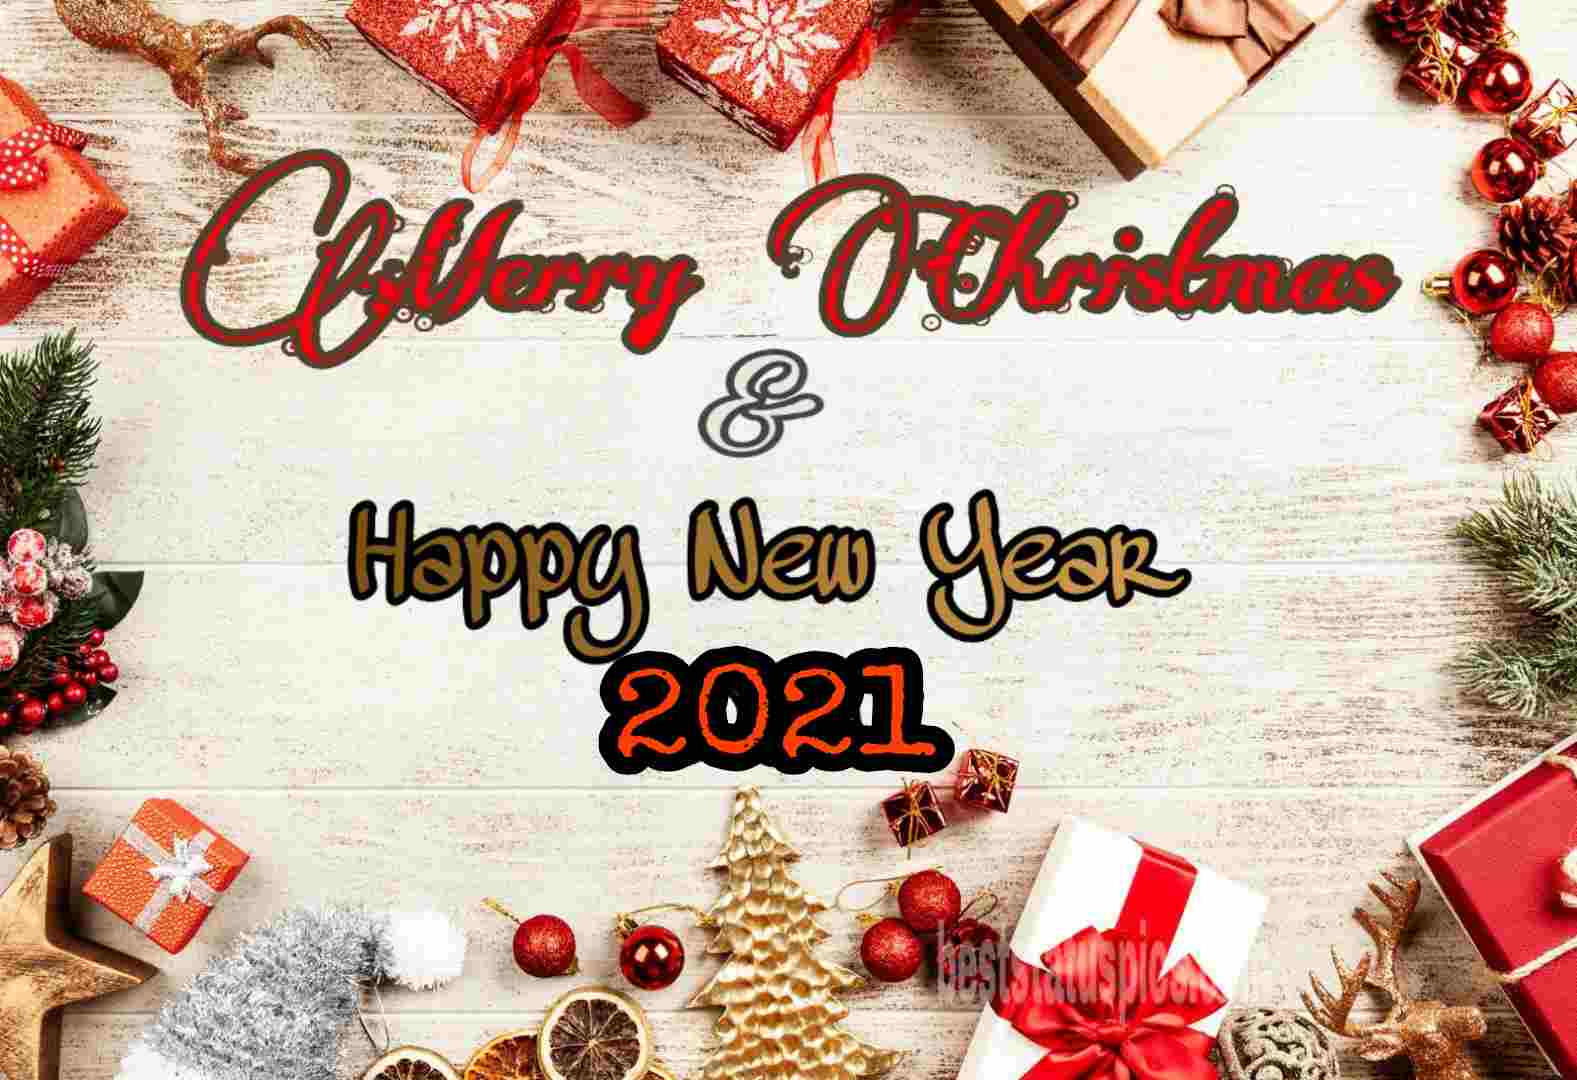 Merry Christmas And Happy New Year 2021 Wishes Image. Best Status Pics